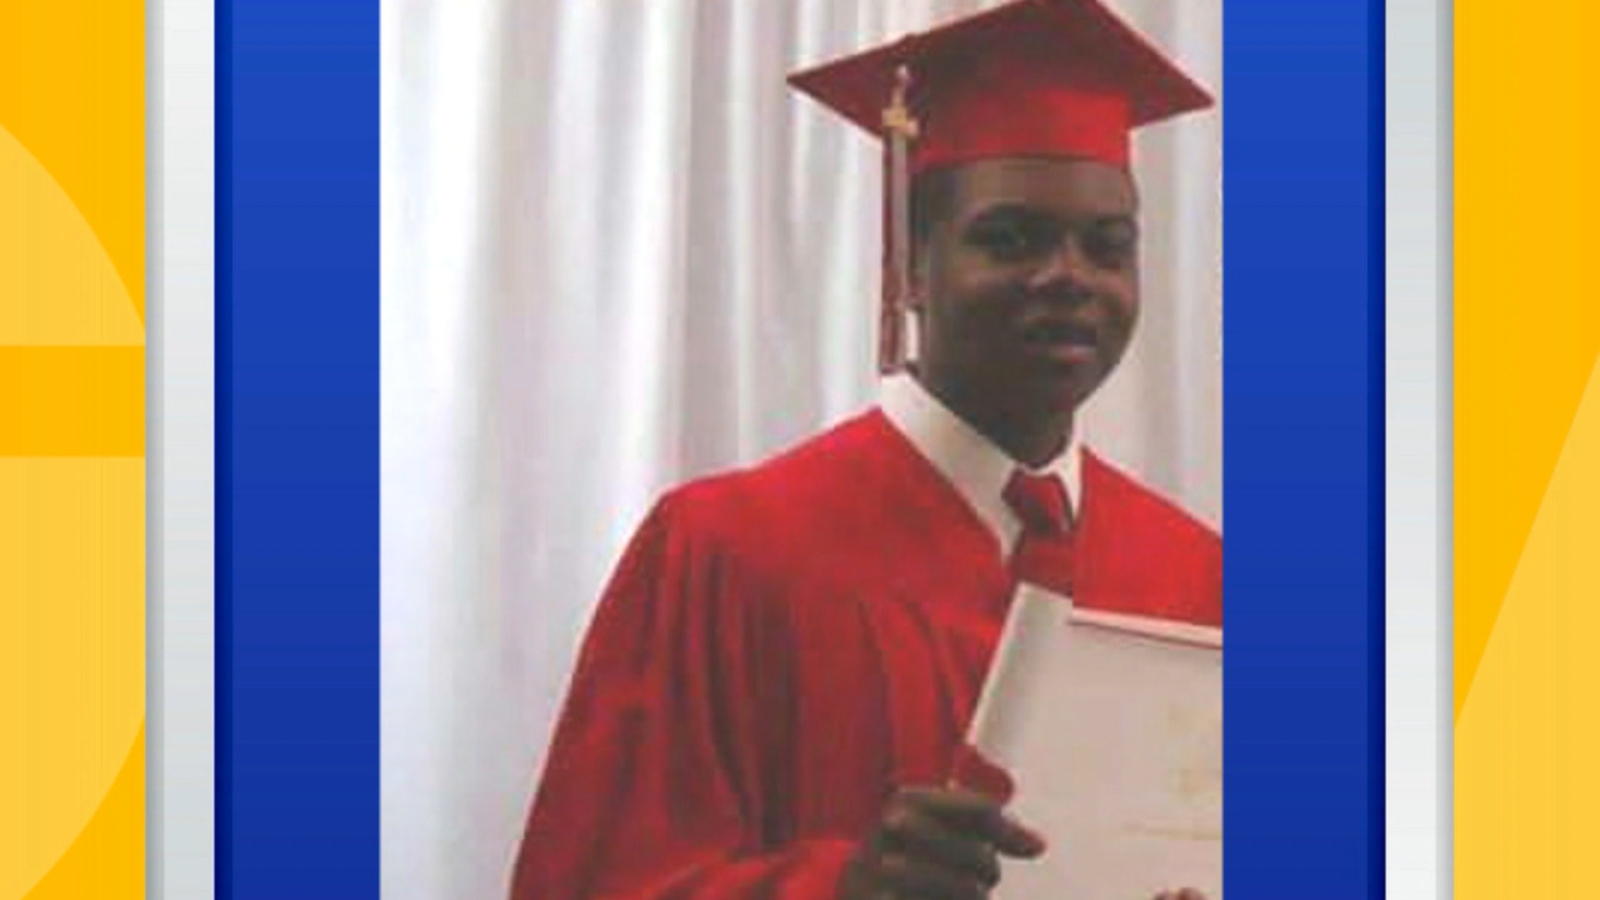 PHOTO: Laquan McDonald, 17, seen in and undated handout photo, was shot and killed by Chicago Police in 2014.